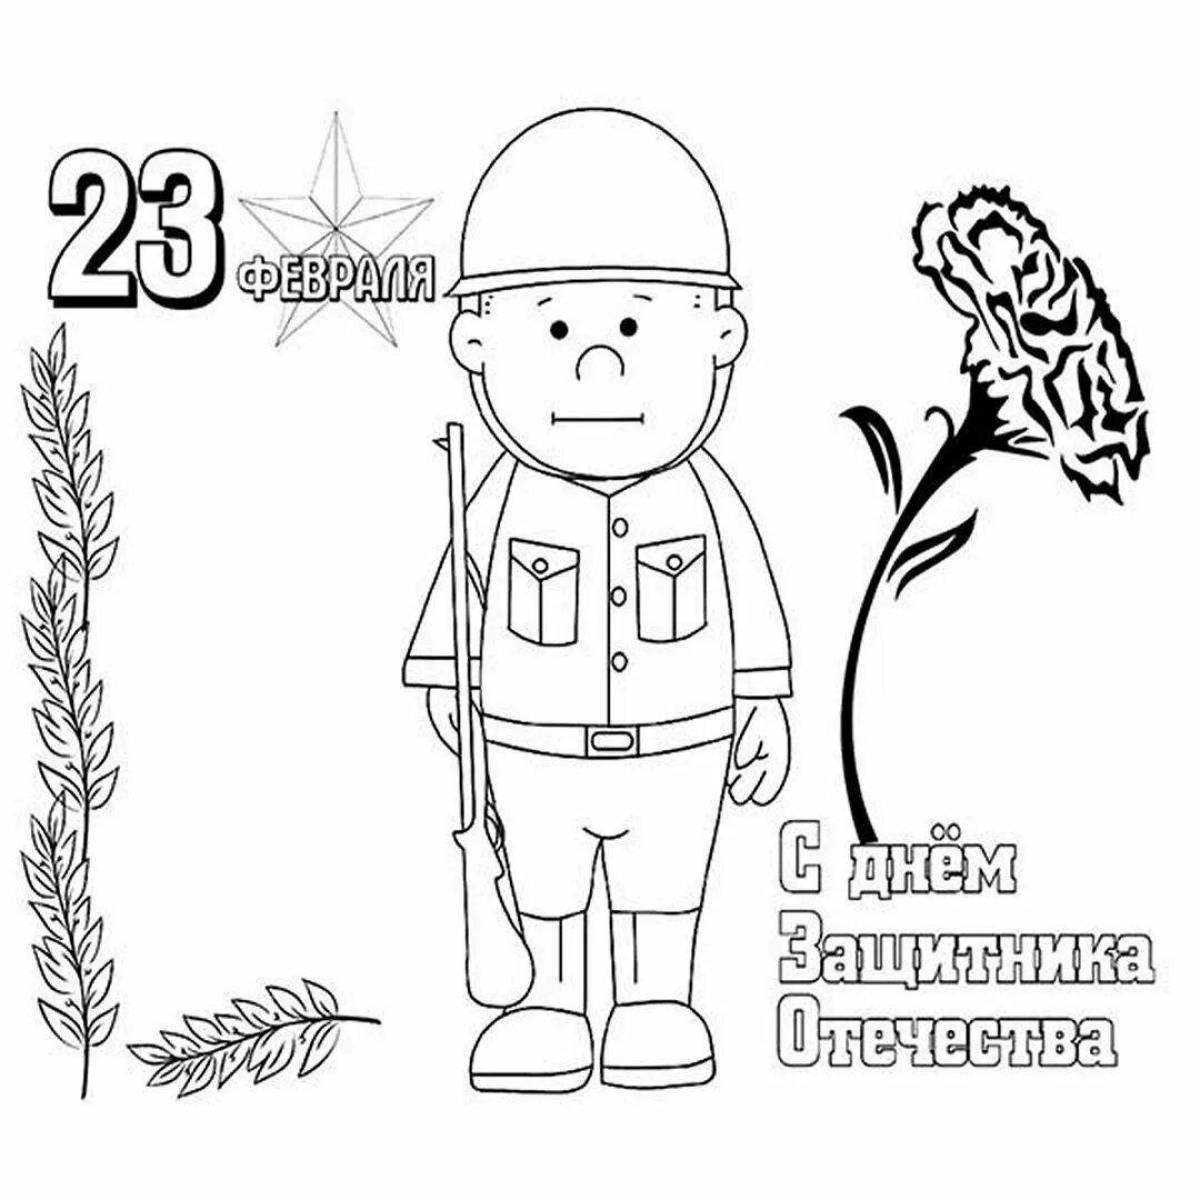 Celebration card with Defender of the Fatherland Day February 23